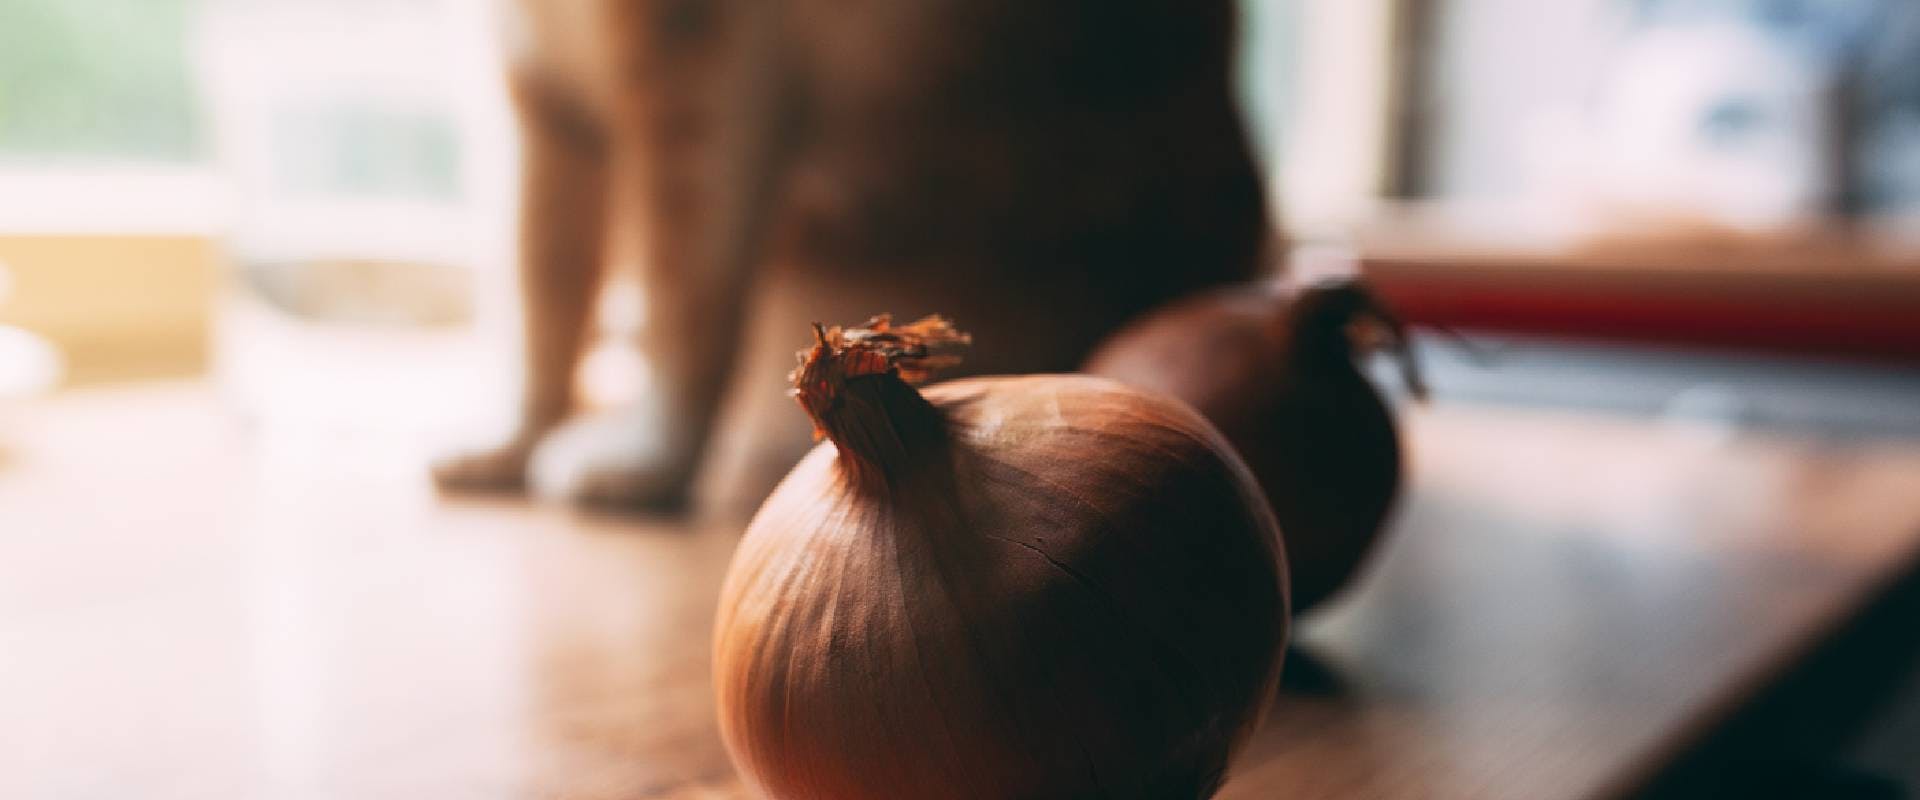 Two yellow onions on a kitchen table with cat in background